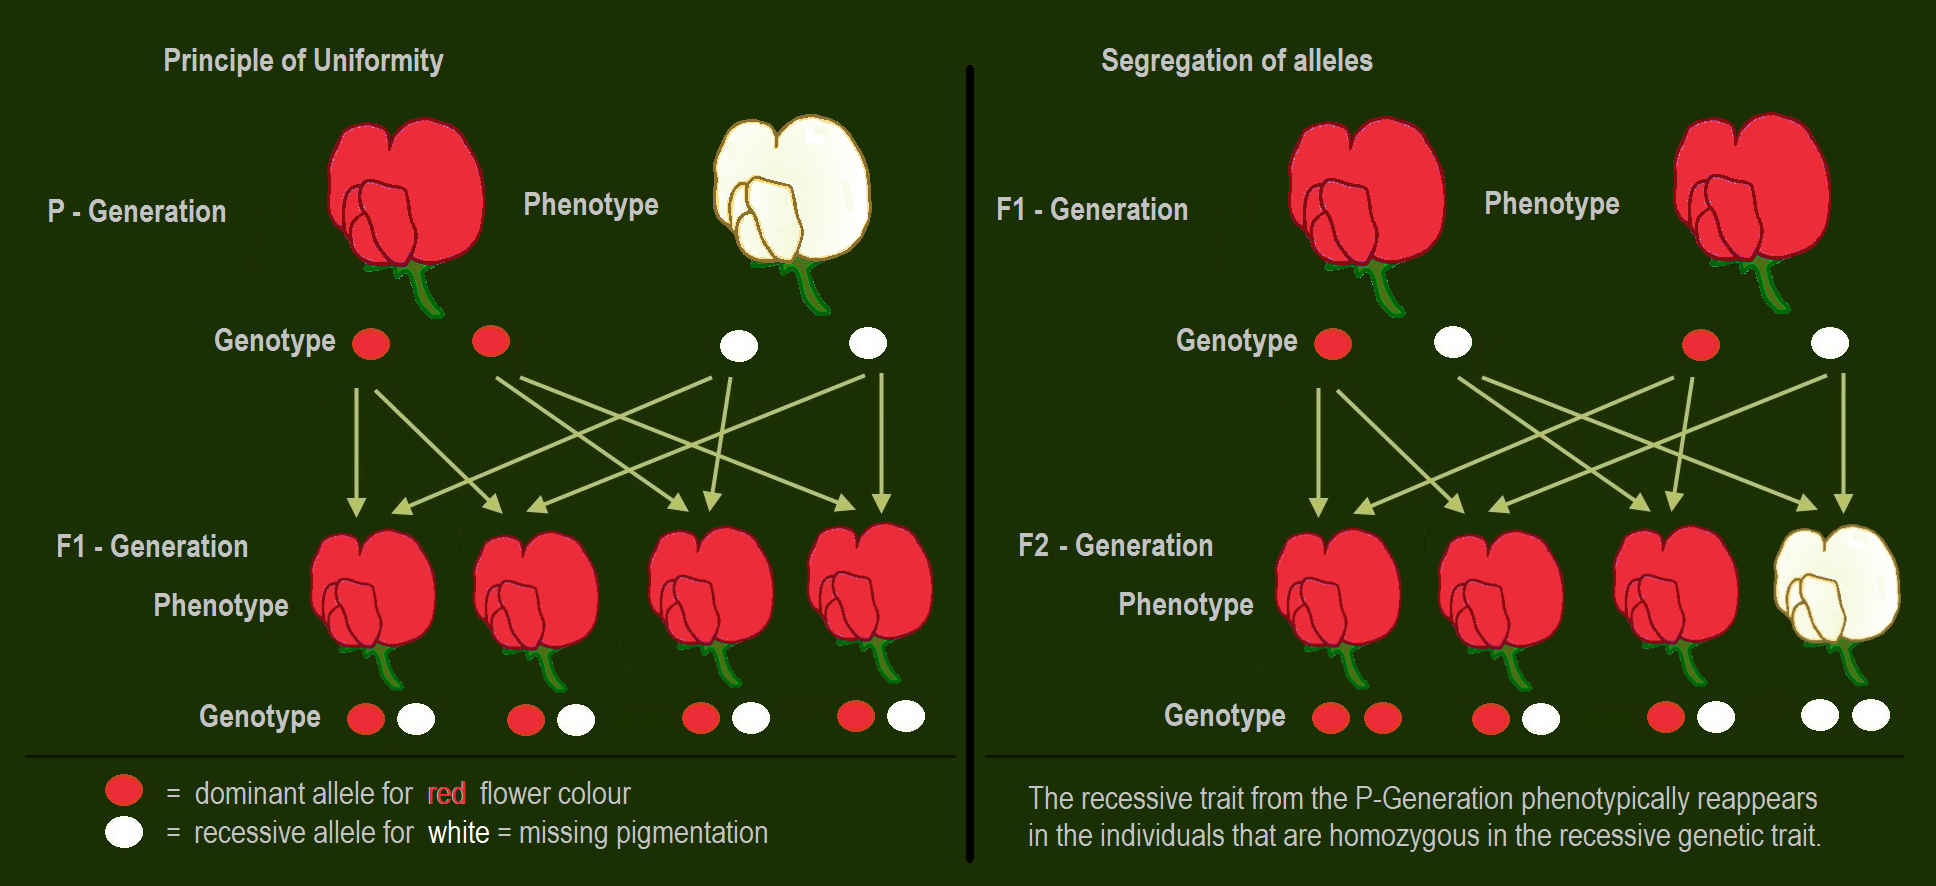 P-Generation and F1-Generation: The dominant allele for purple-red flower hides the phenotypic effect of the recessive allele for white flowers. F2-Generation: The recessive trait from the P-Generation phenotypically reappears in the individuals that are homozygous with the recessiv genetic trait.